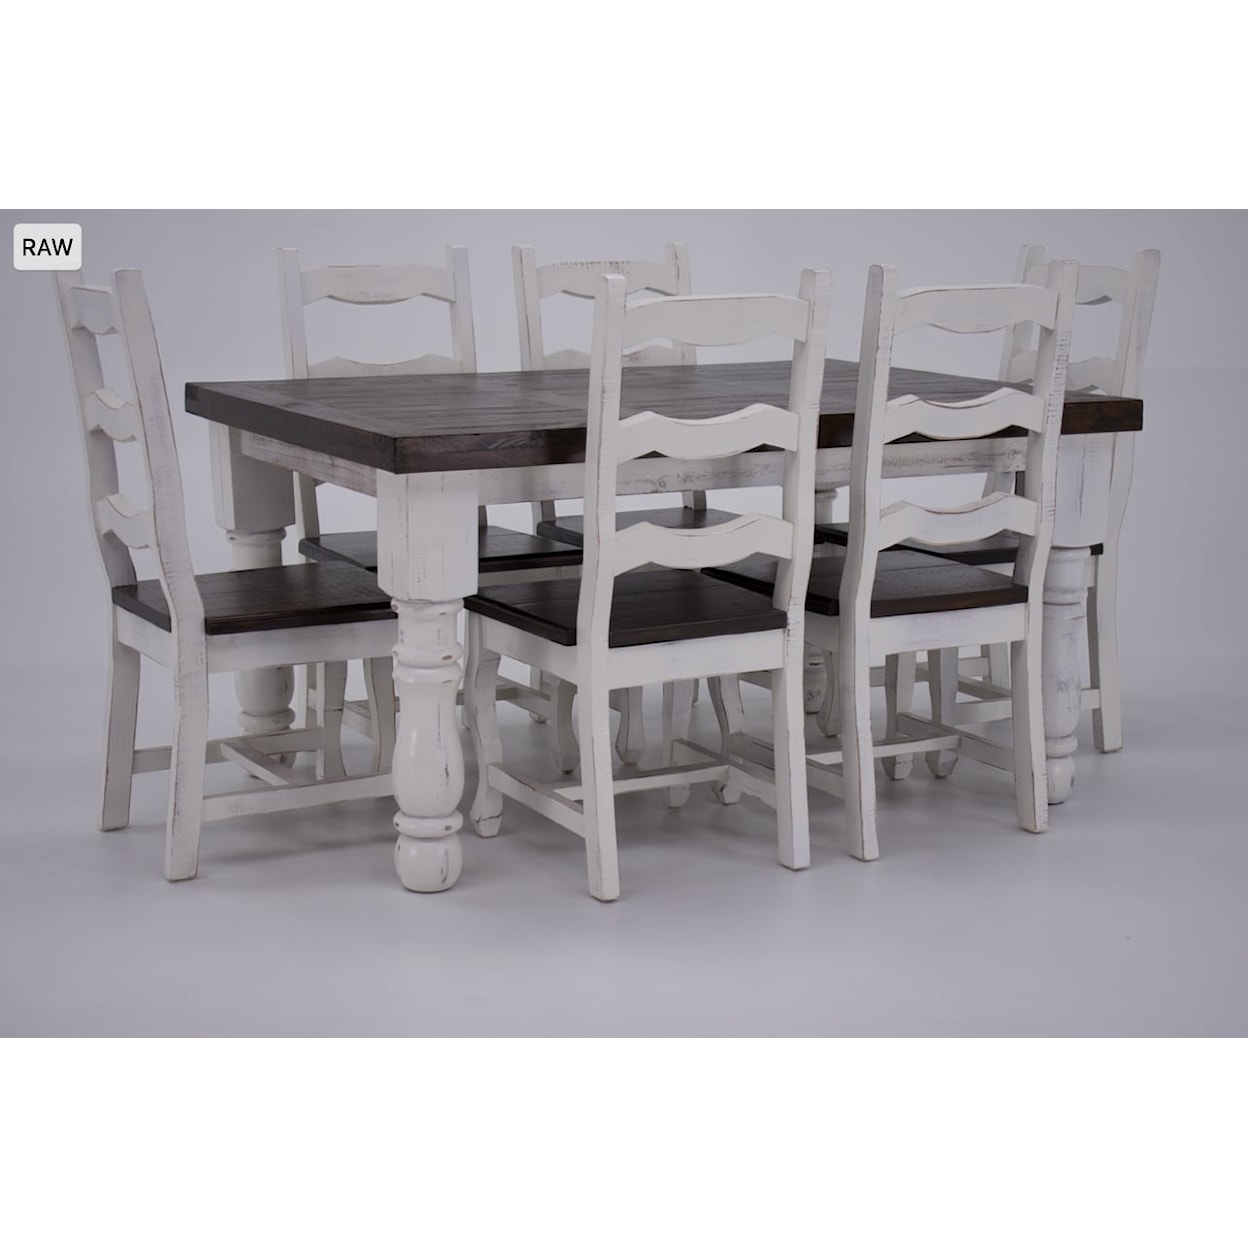 Vintage MANSION Mansion Dining Table & 6 Chairs